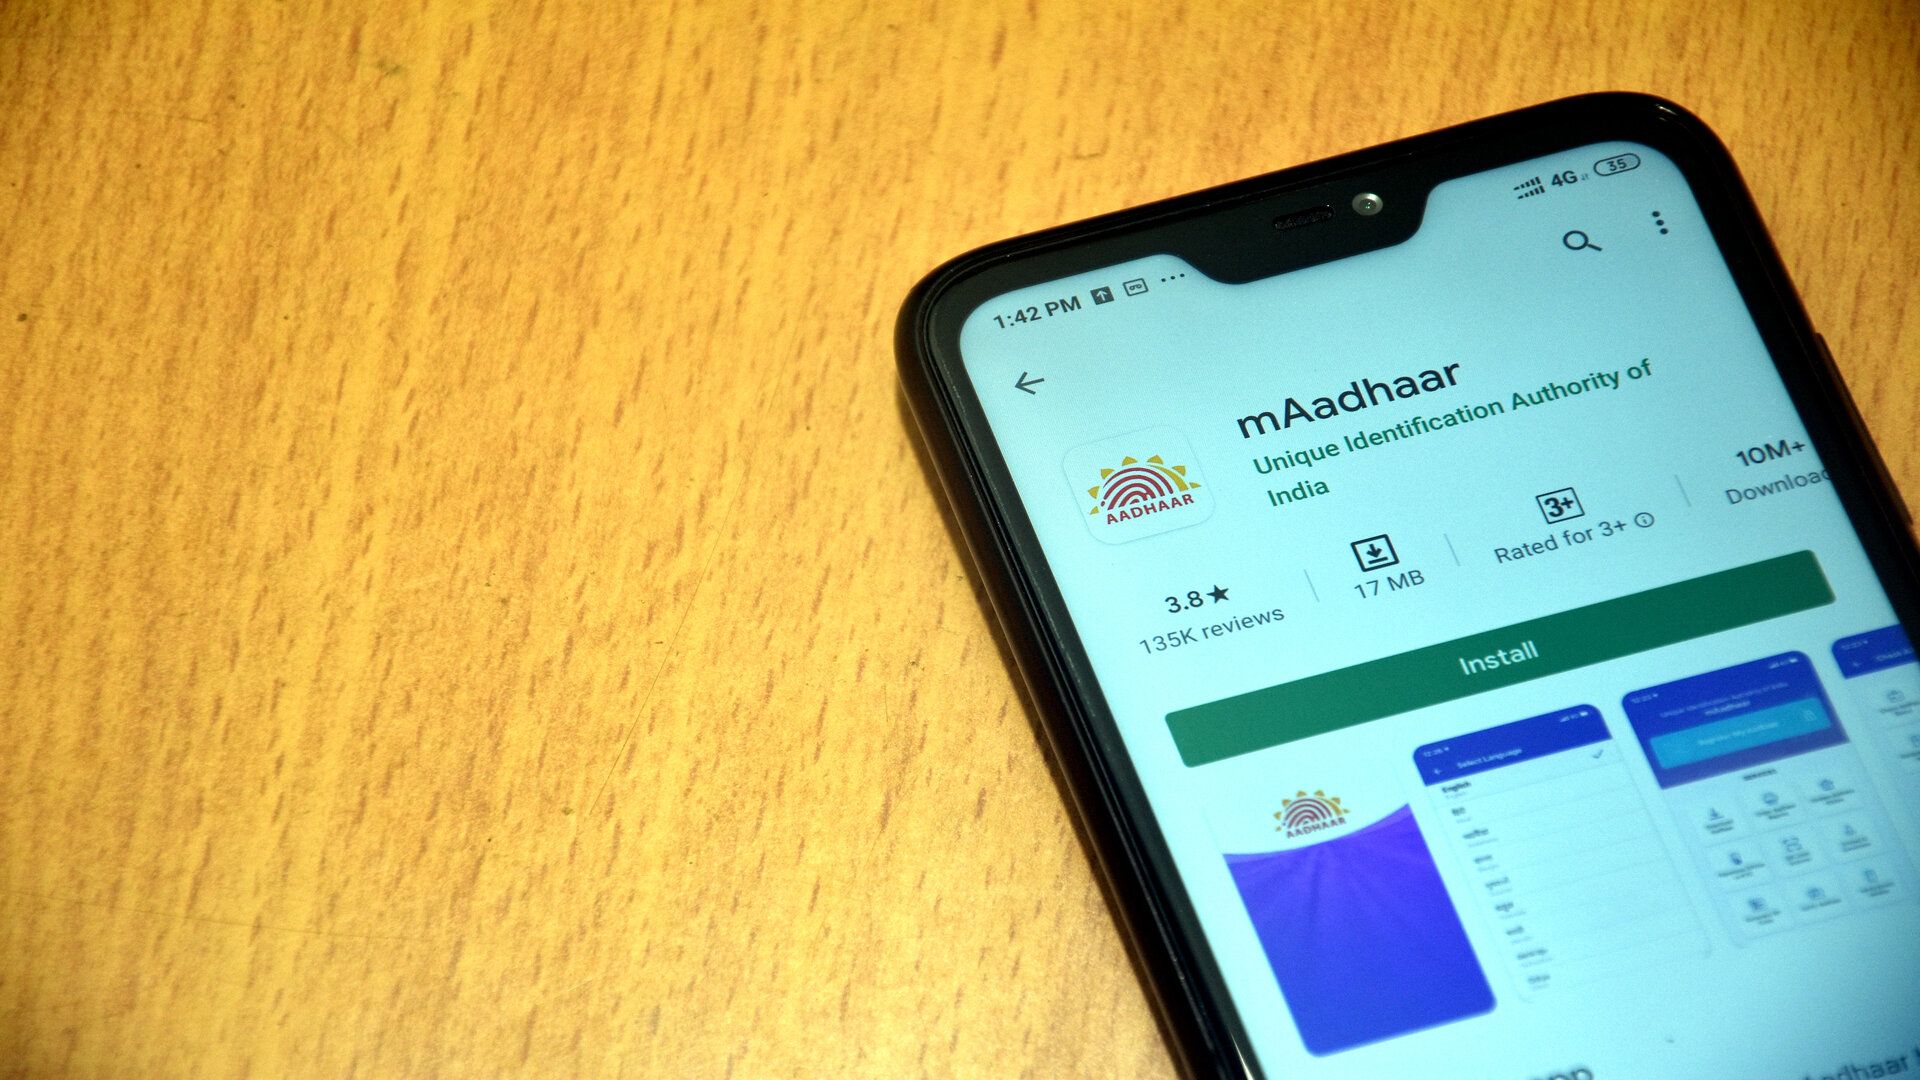 Facts about the mAadhaar App